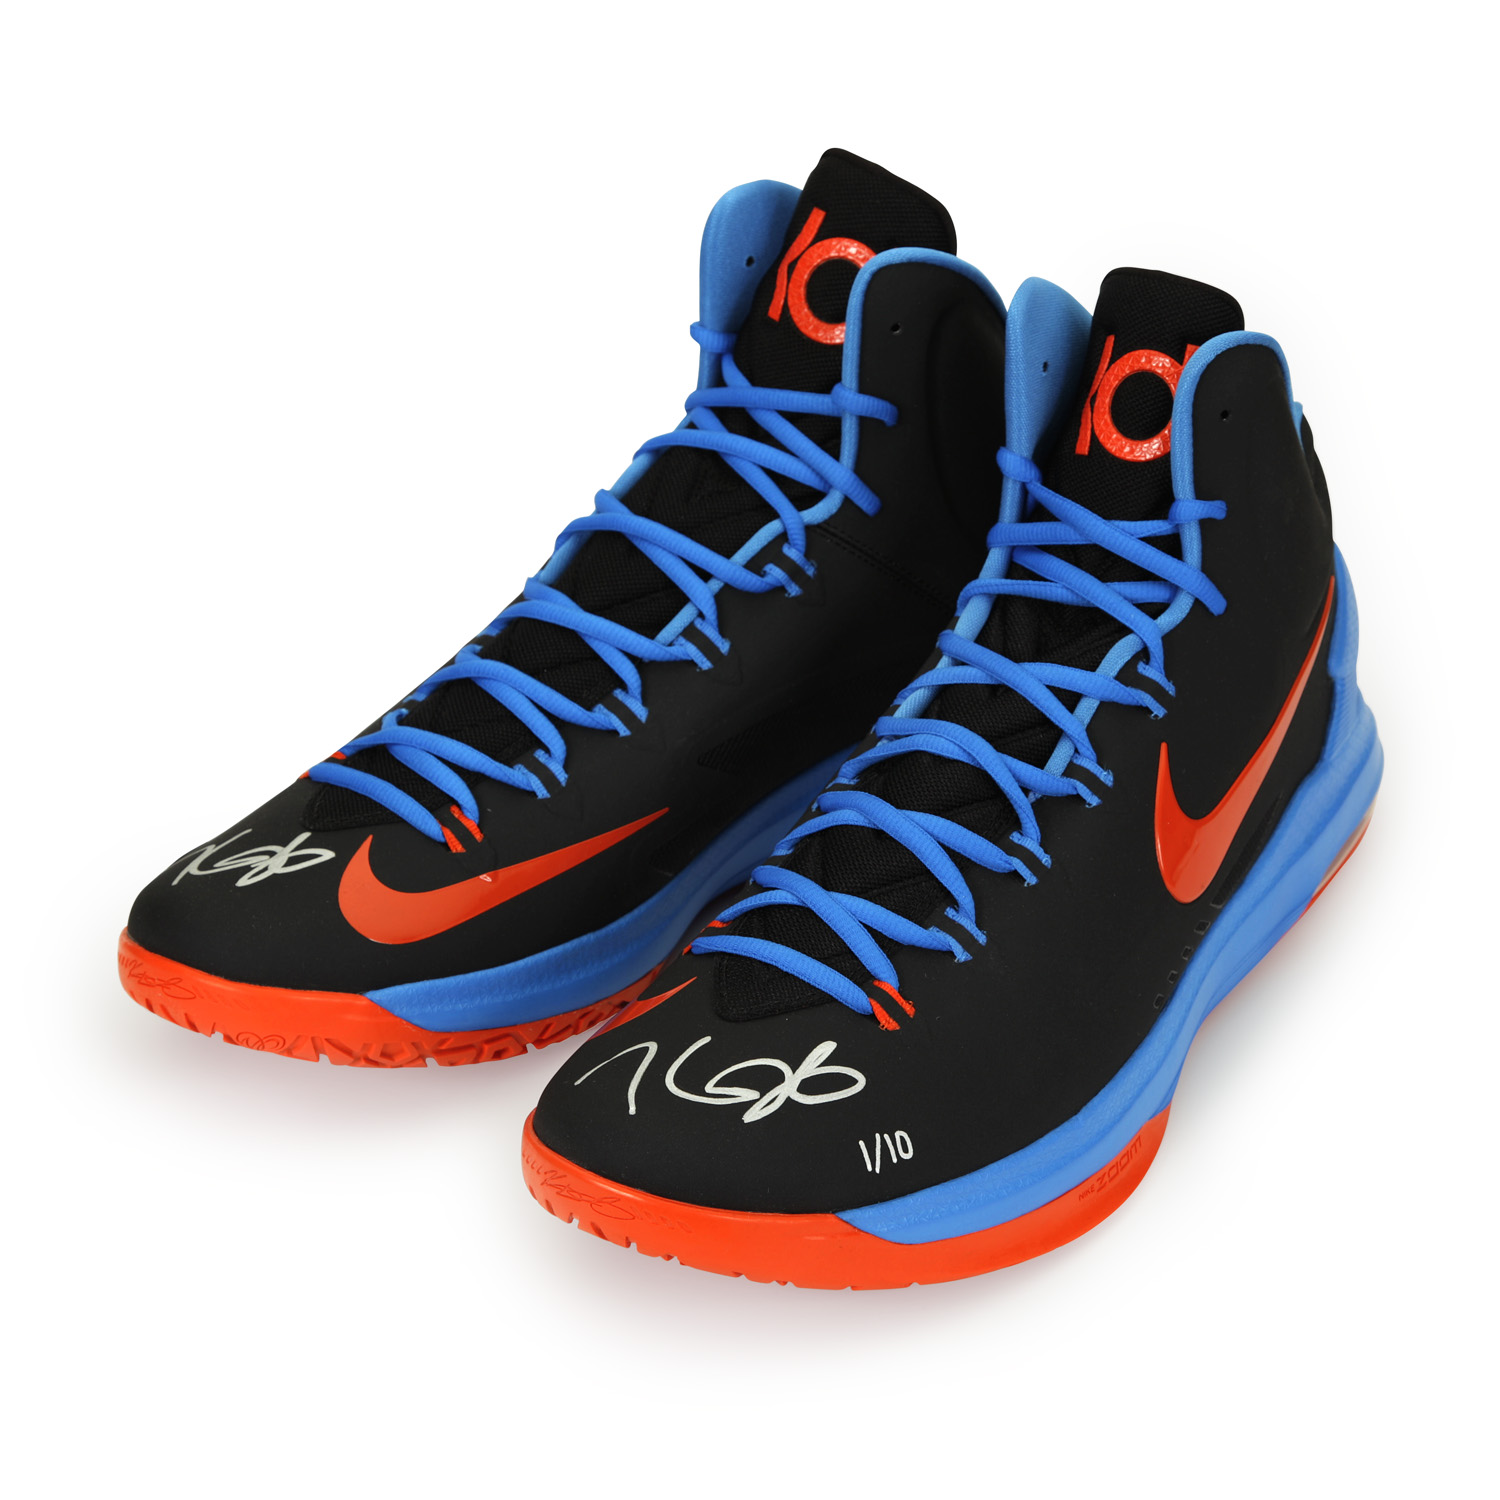 kevin durant limited edition shoes